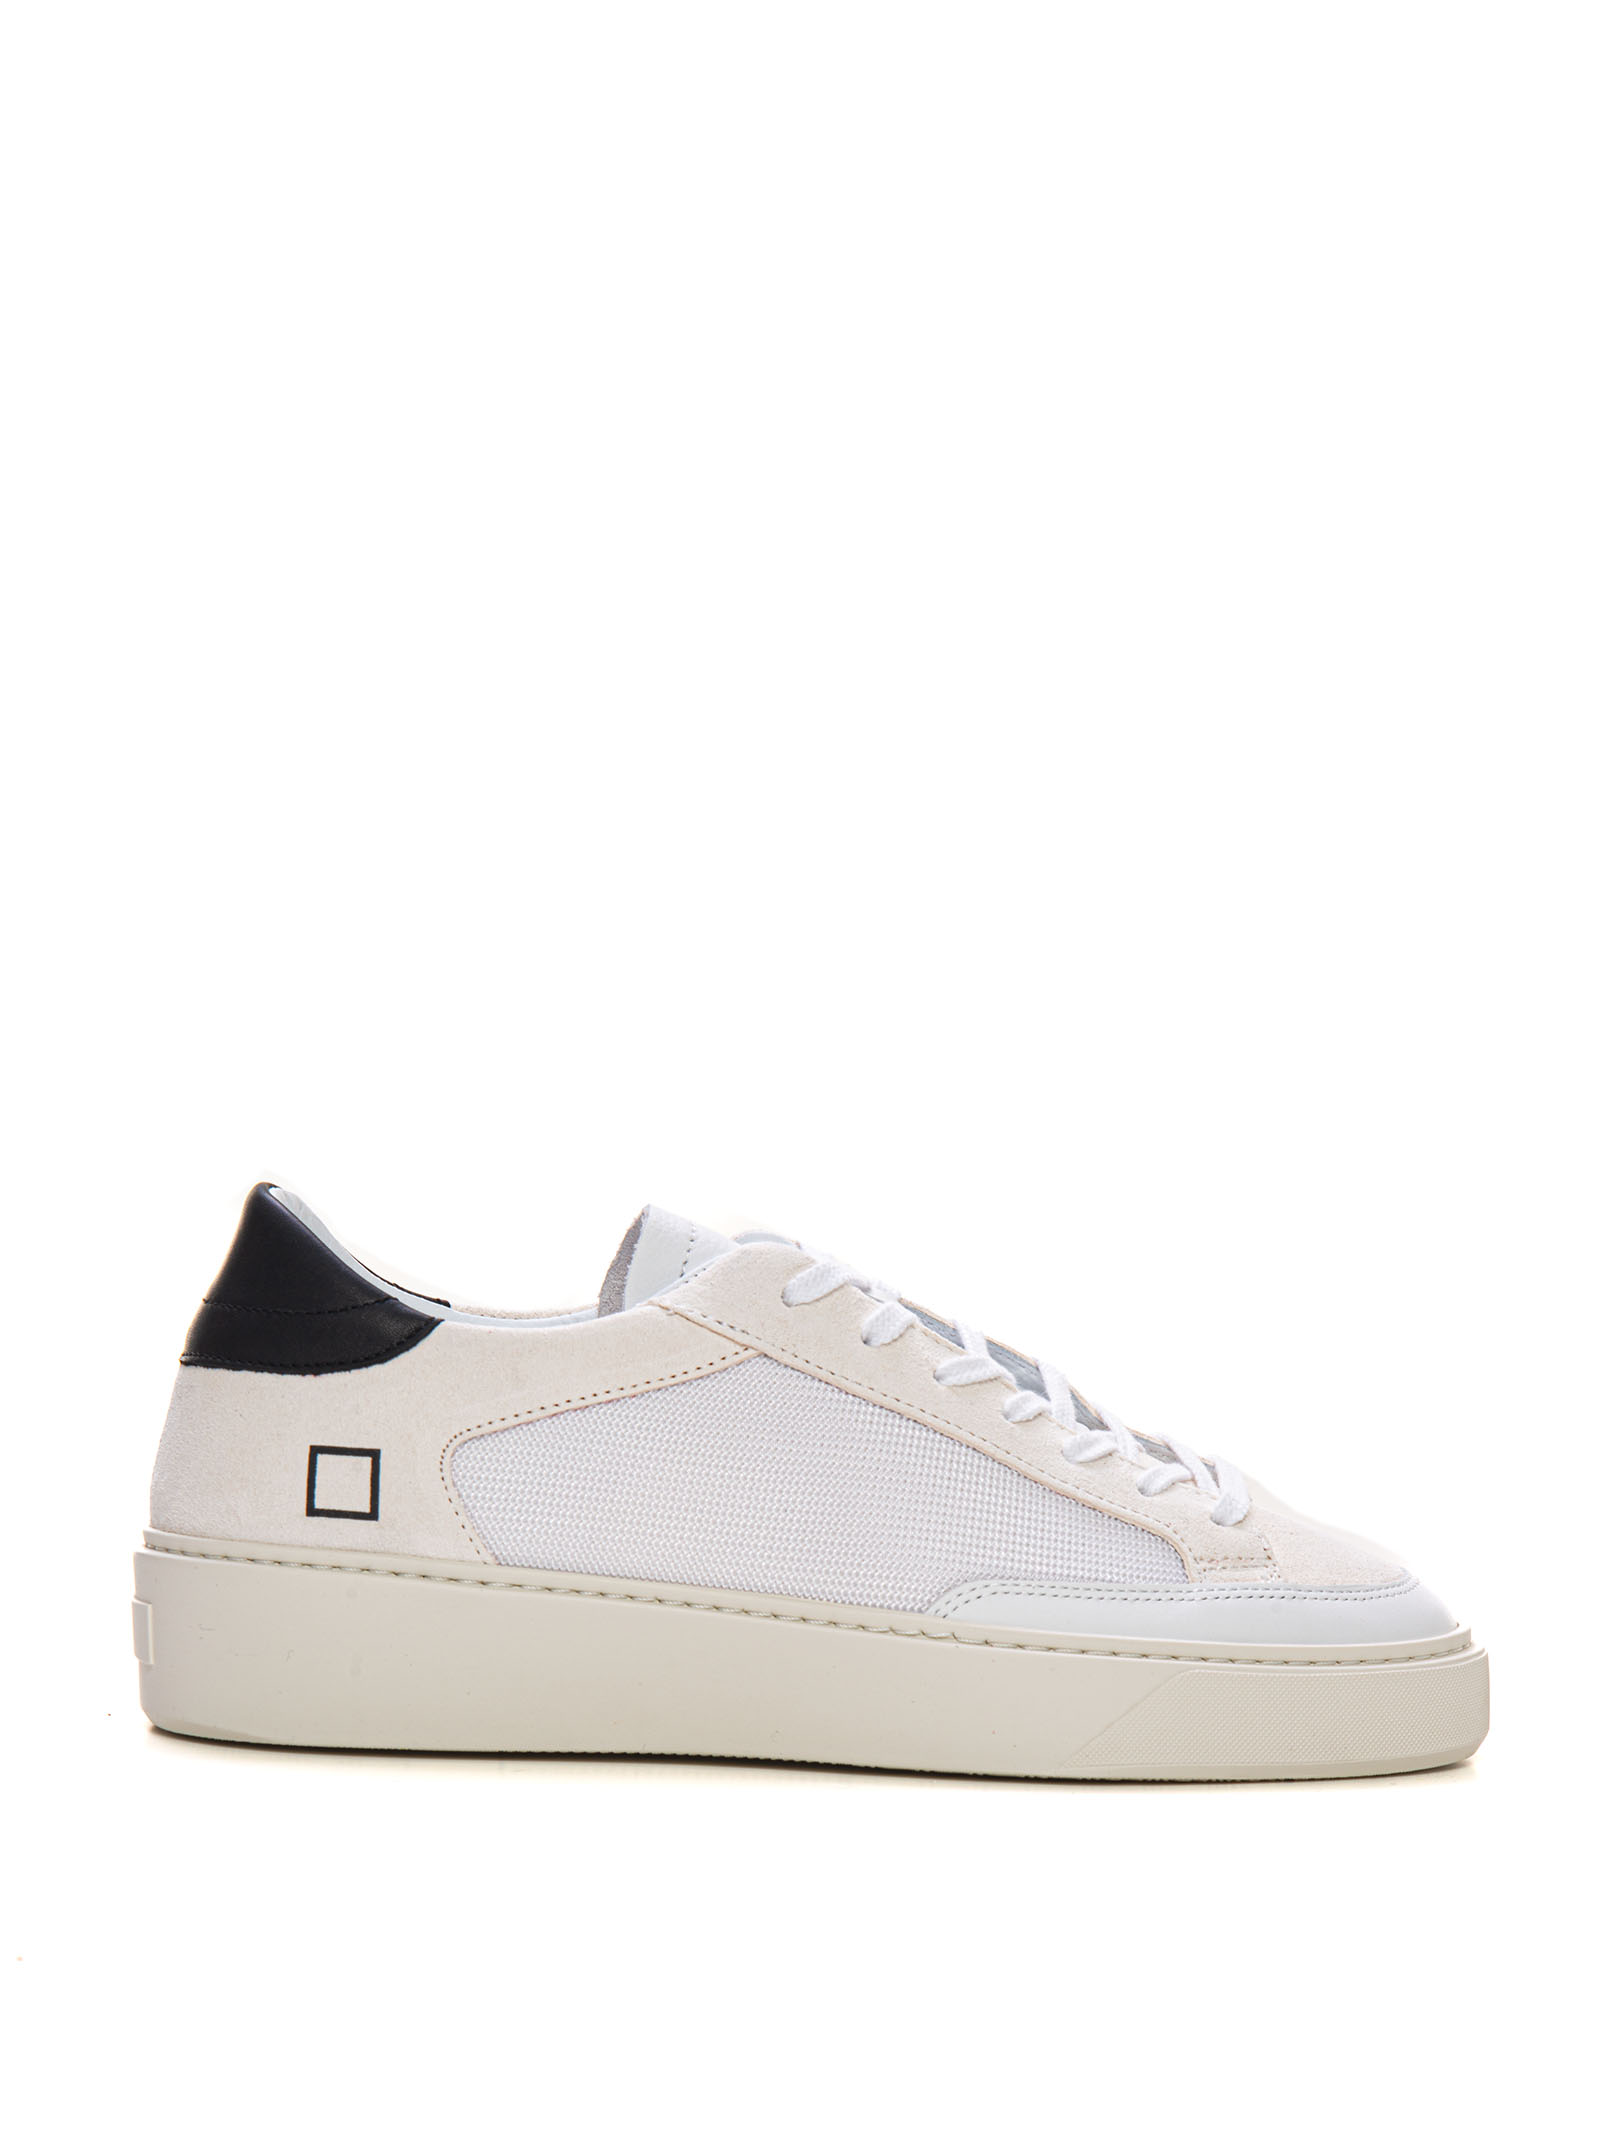 Shop Date Levante Sneakers With Raised Part At The Back In White